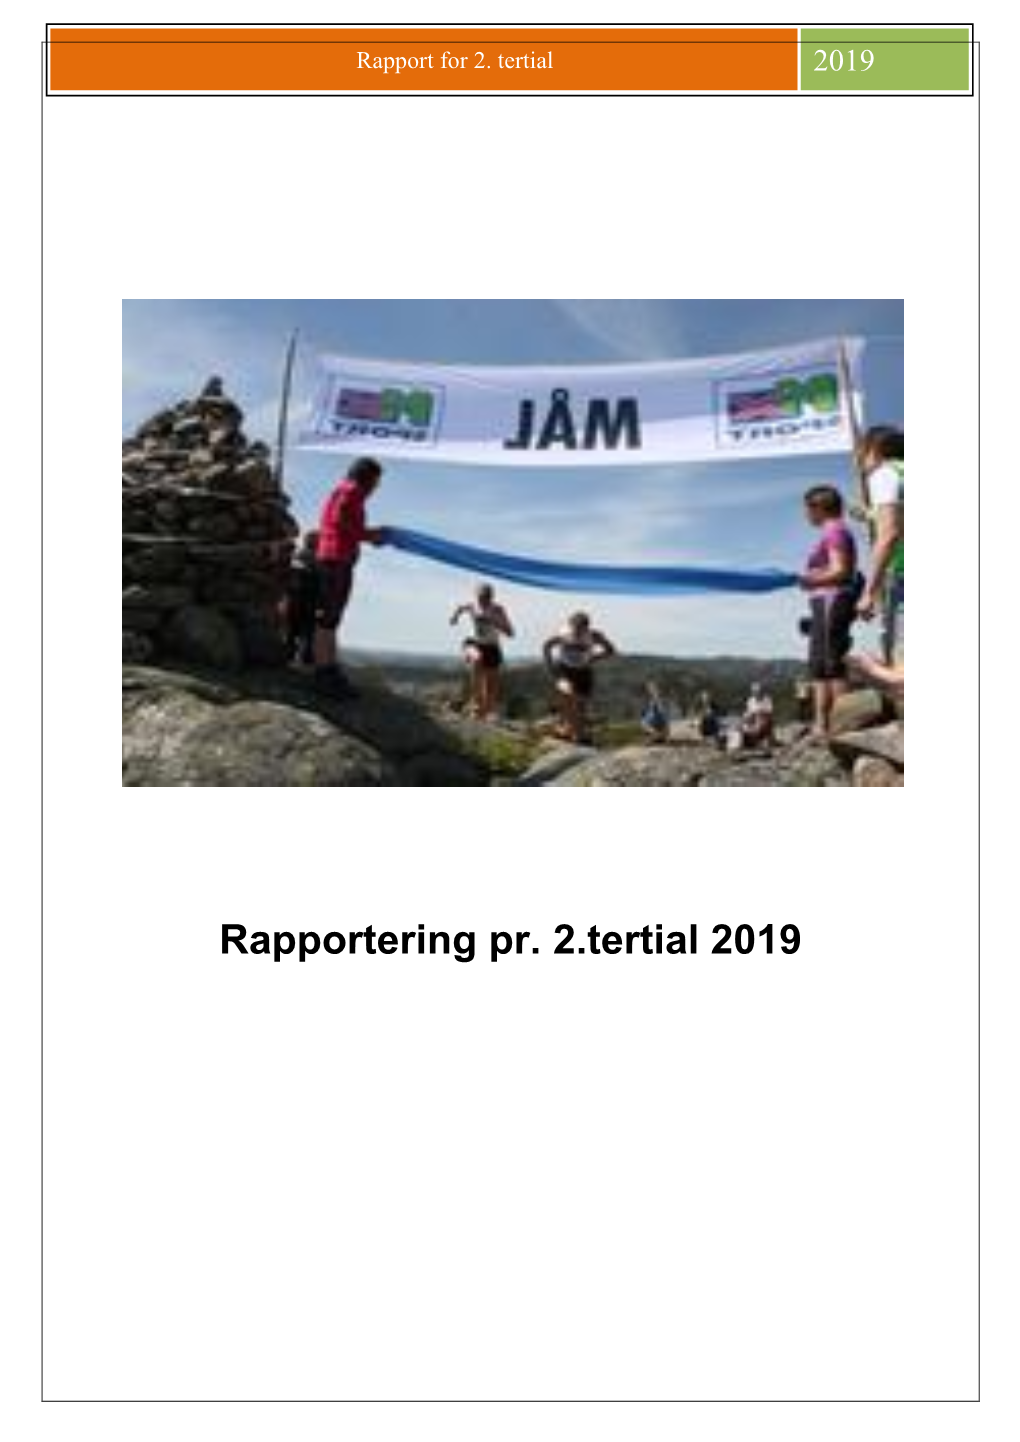 Rapport for 2. Tertial 2019